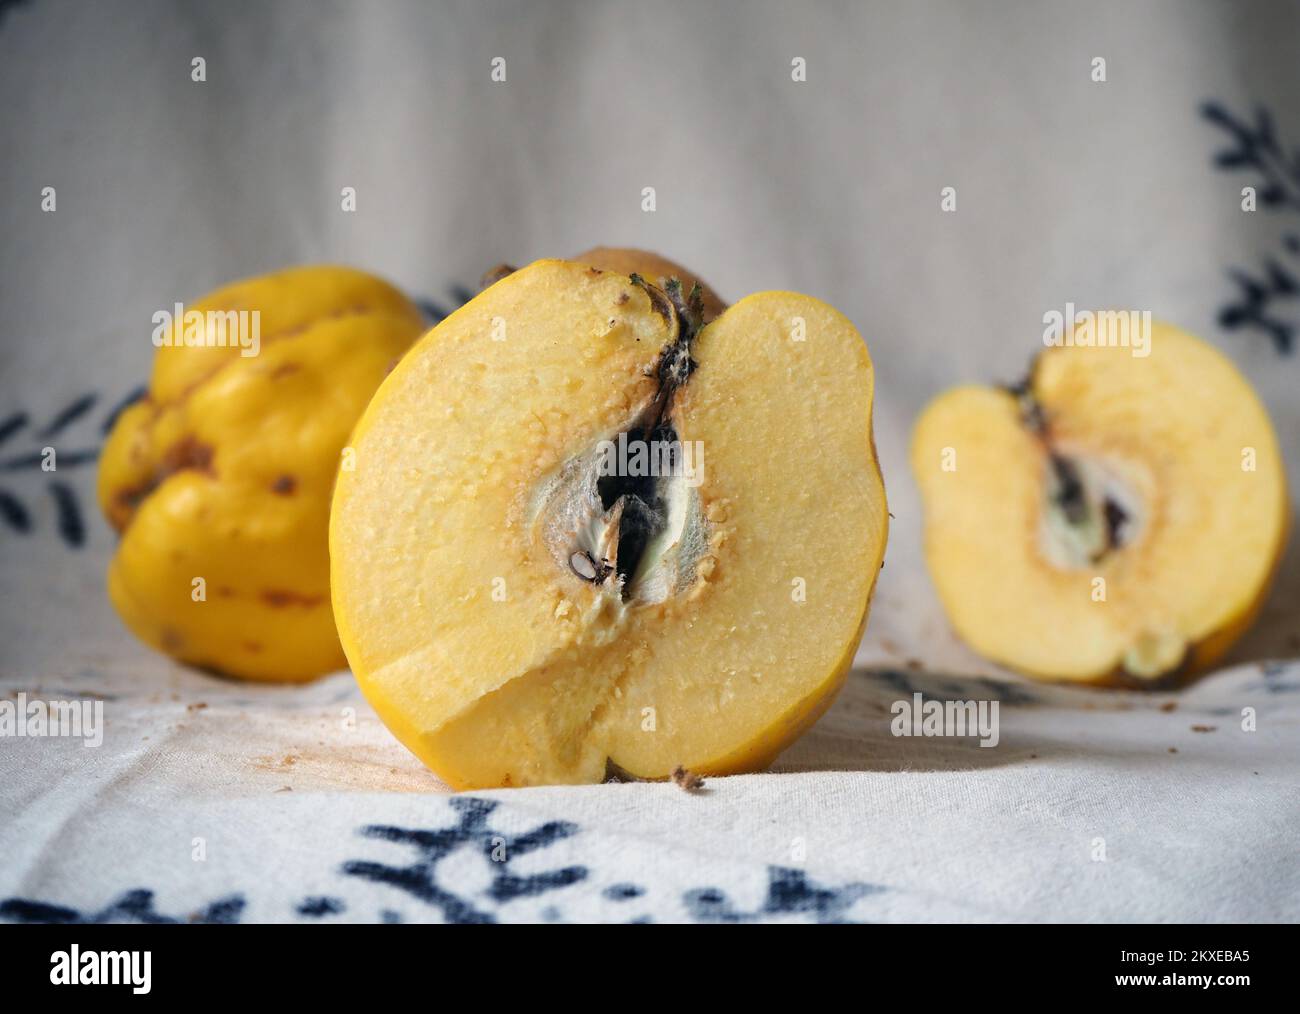 Half a quince standing on the abstract motifs. Stock Photo